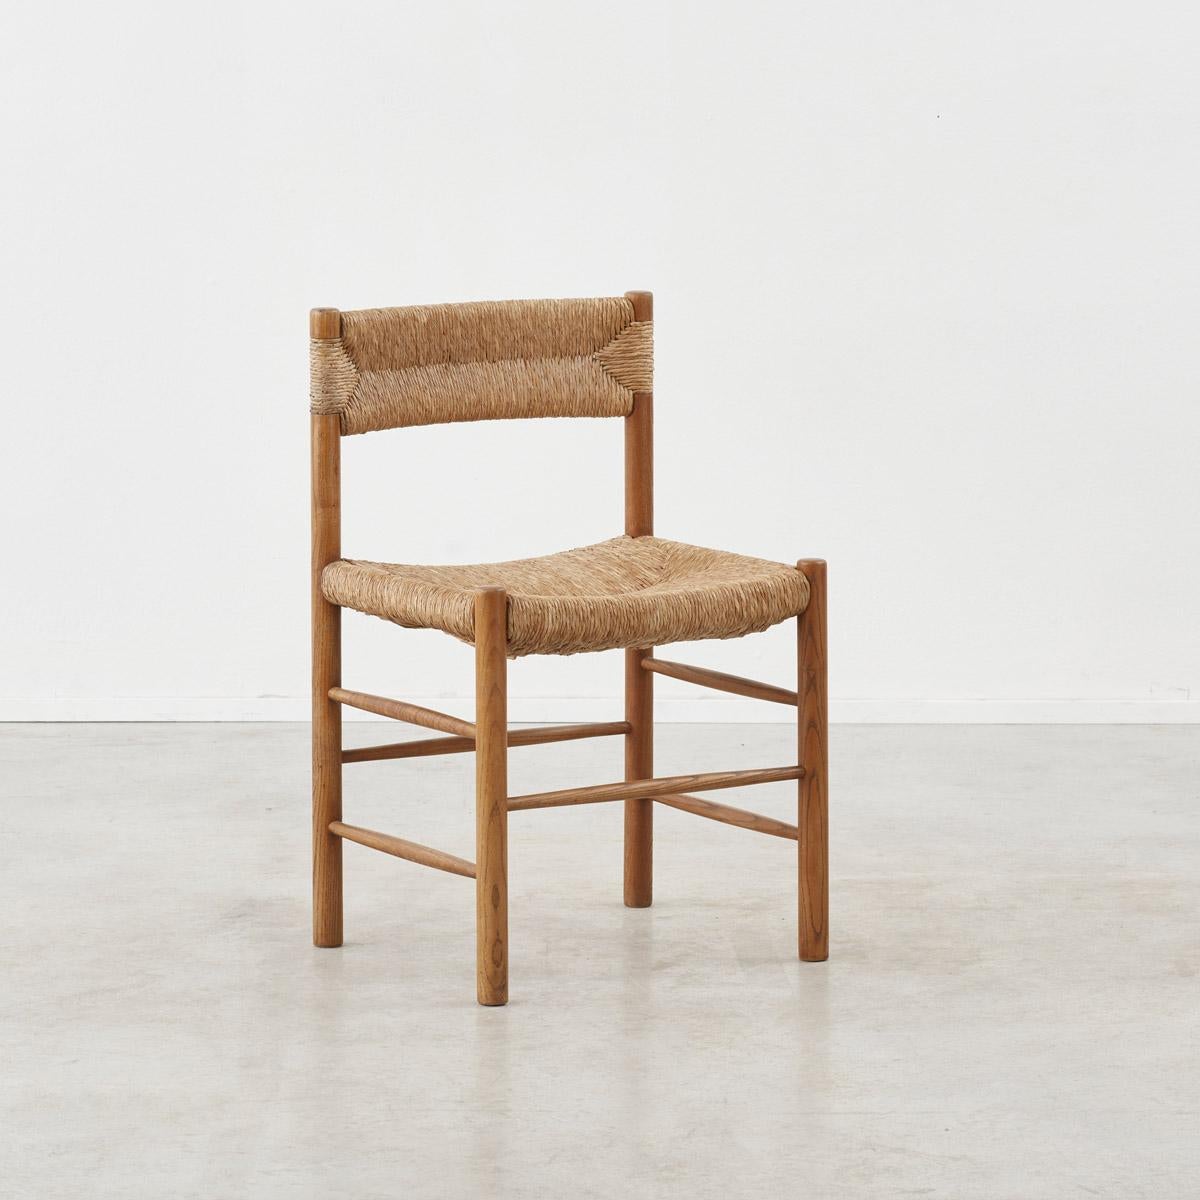 Woven Set of Six Charlotte Perriand Dordogne Chairs for Robert Sentou, France c1950